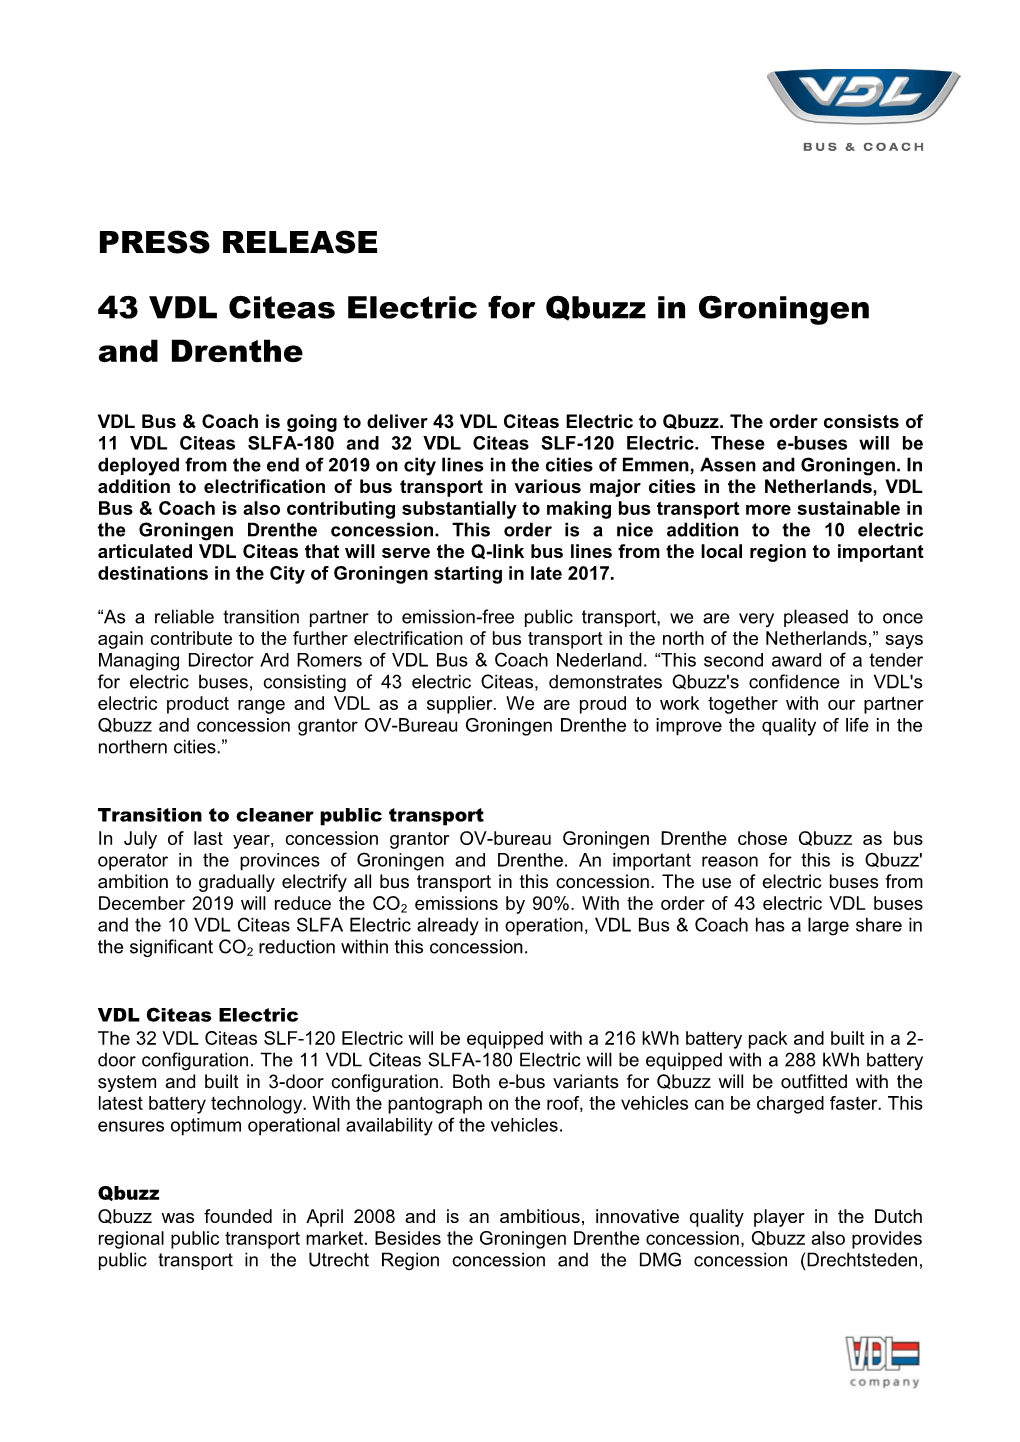 PRESS RELEASE 43 VDL Citeas Electric for Qbuzz in Groningen And